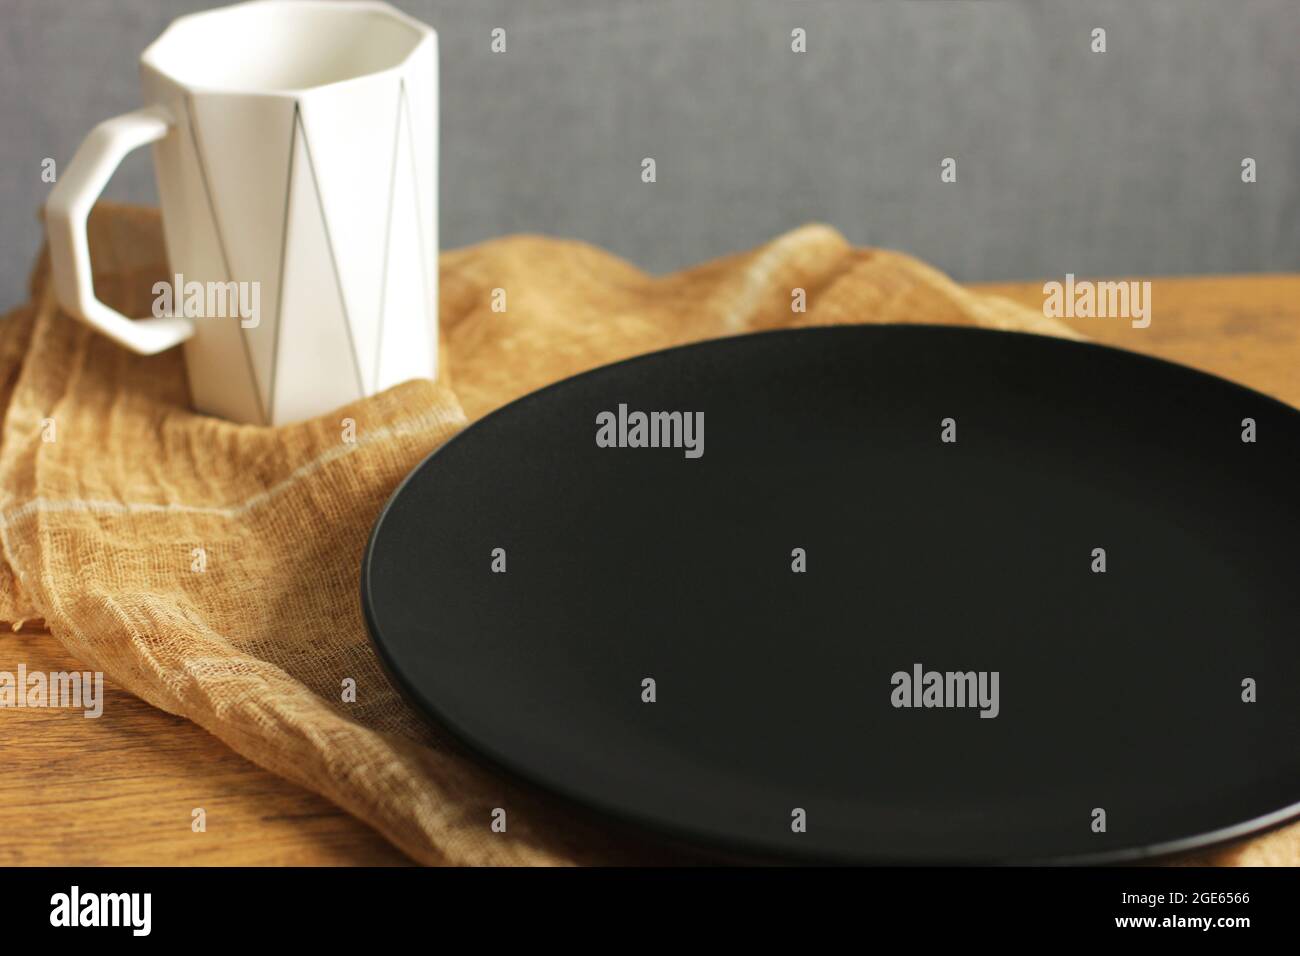 Empty black plate and white cup. Empty dishes. Minimalistic set of dishes. Plate without food Stock Photo